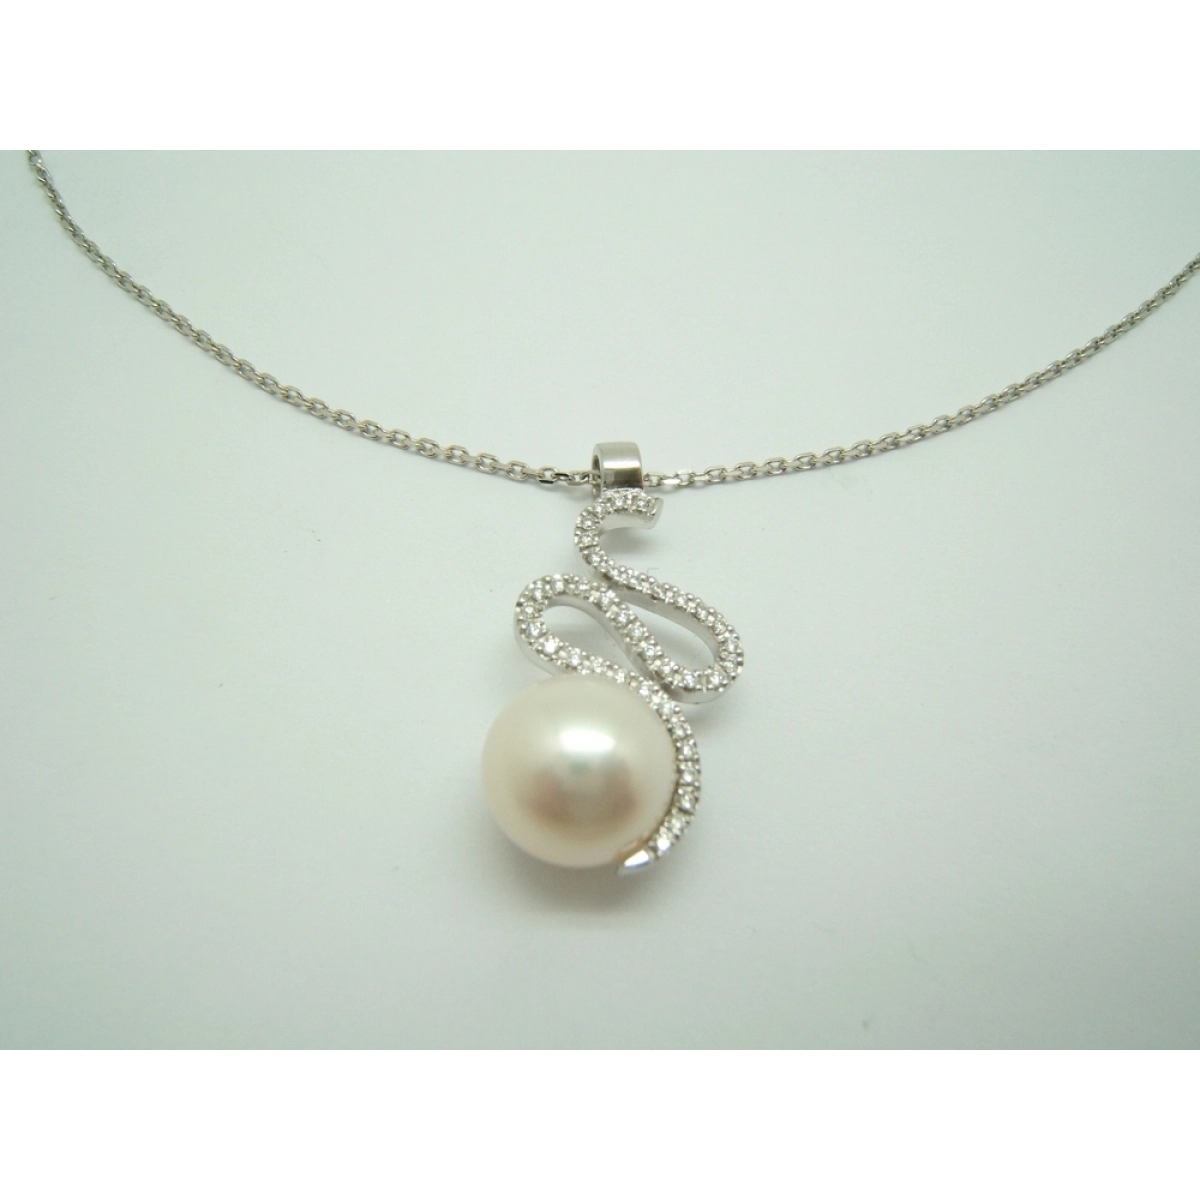 PENDANT WHITE GOLD AND PEARL C-86 B-79